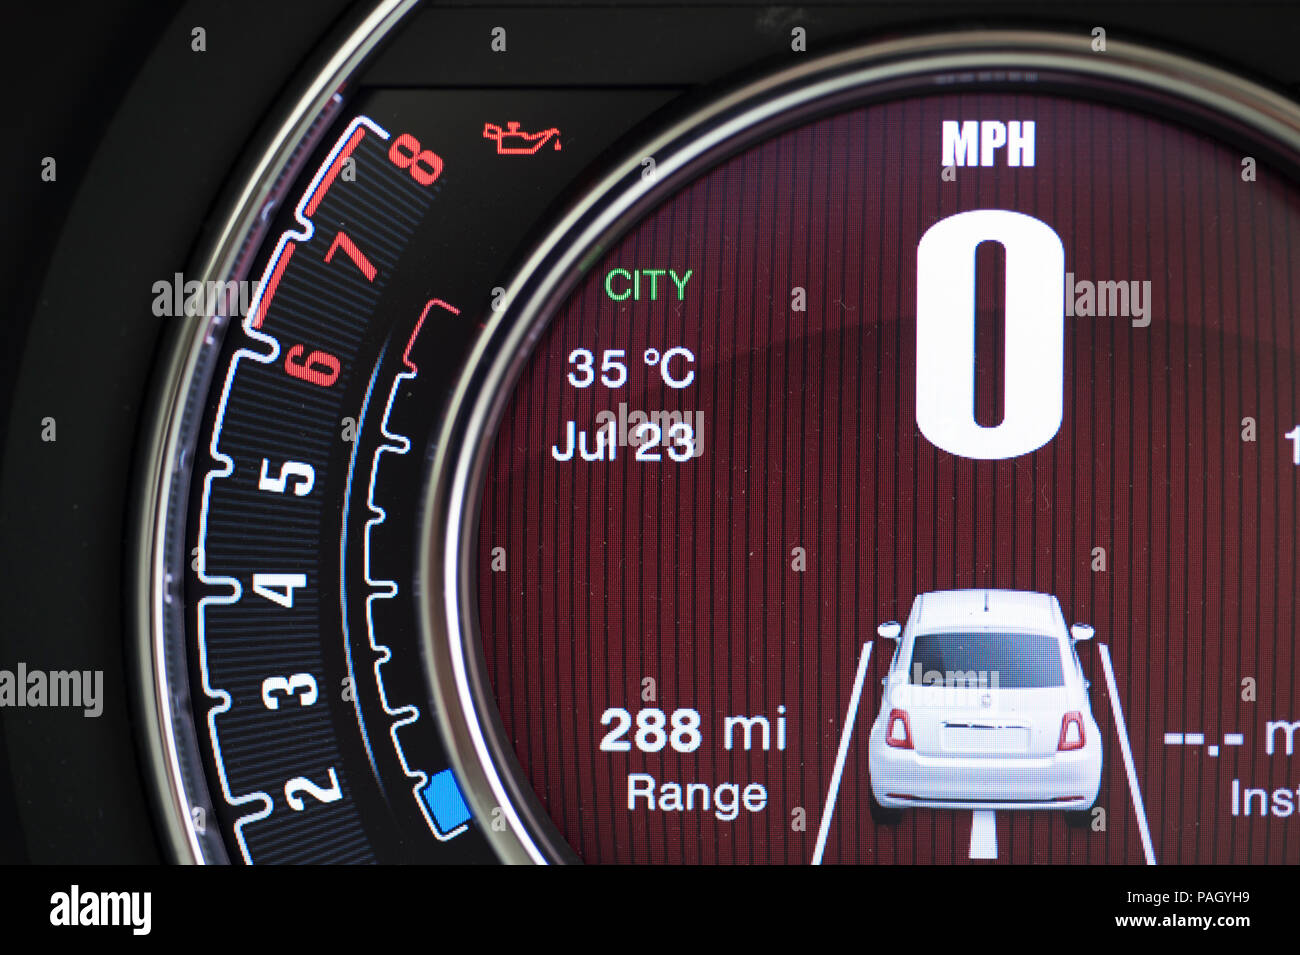 London, UK. 23 July, 2018. Hot, dry weather continues in London with more humid nights and high daytime temperatures forecast. A car parked in full sun with temperature gauge reading 35 degrees outside temperature in Wimbledon, London. Credit: Malcolm Park/Alamy Live News. Stock Photo